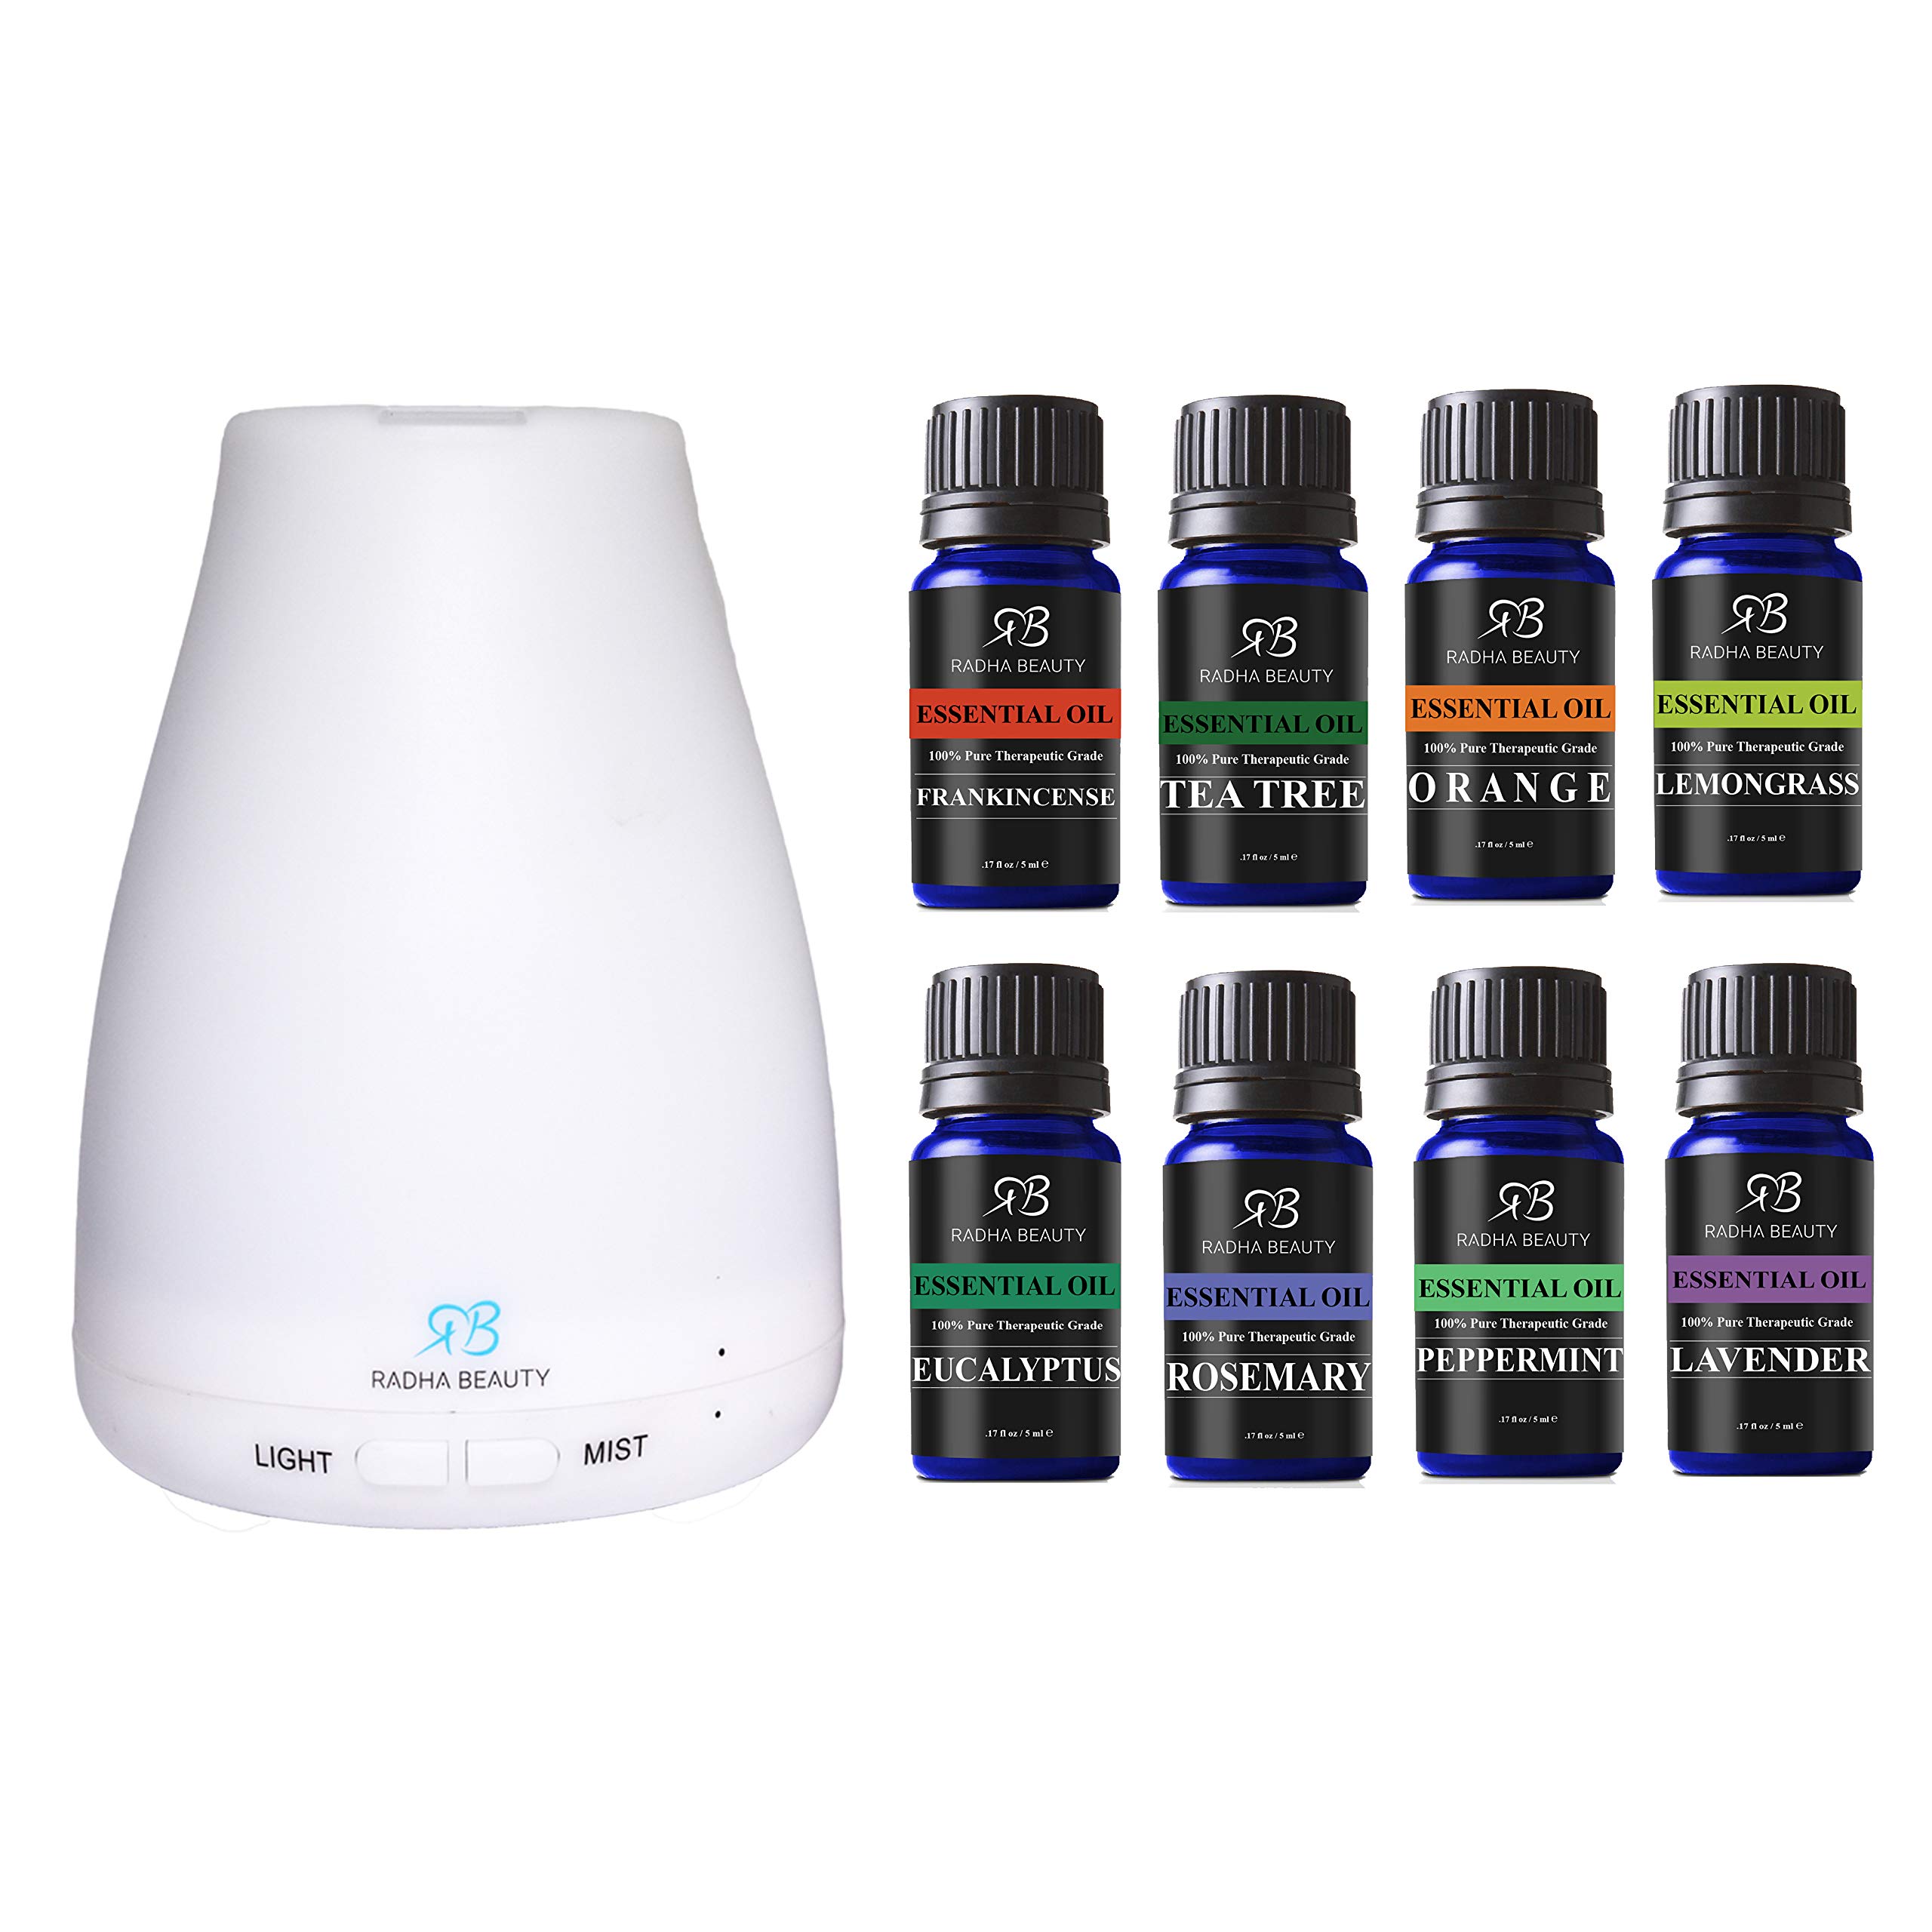 Aromatherapy Top 8 Essential Oil and Diffuser Gift Set - Peppermint, Tea Tree, Lavender & Eucalyptus - Auto Shut-off and 7 Color LED Lights - Therapeutic Grade Oils by Radha Beauty